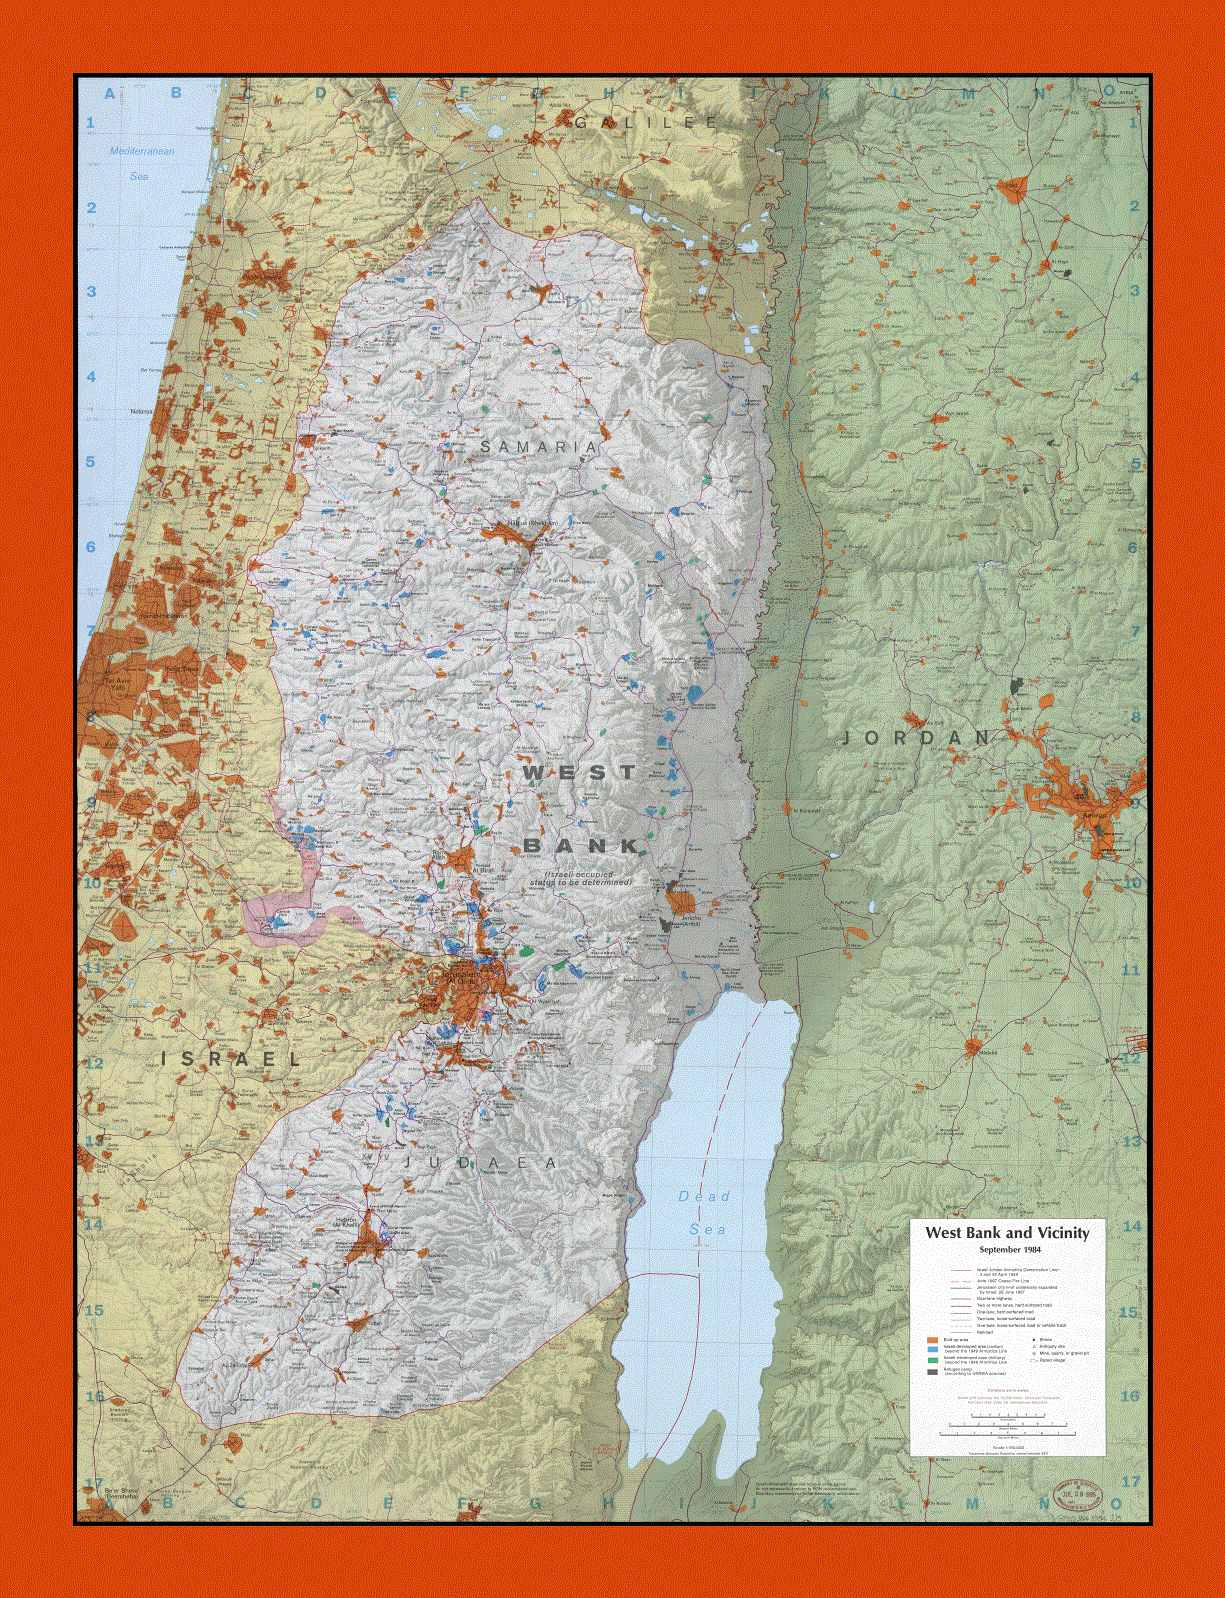 Map Of West Bank And Vicinity 1984 Maps Of West Bank Maps Of Asia